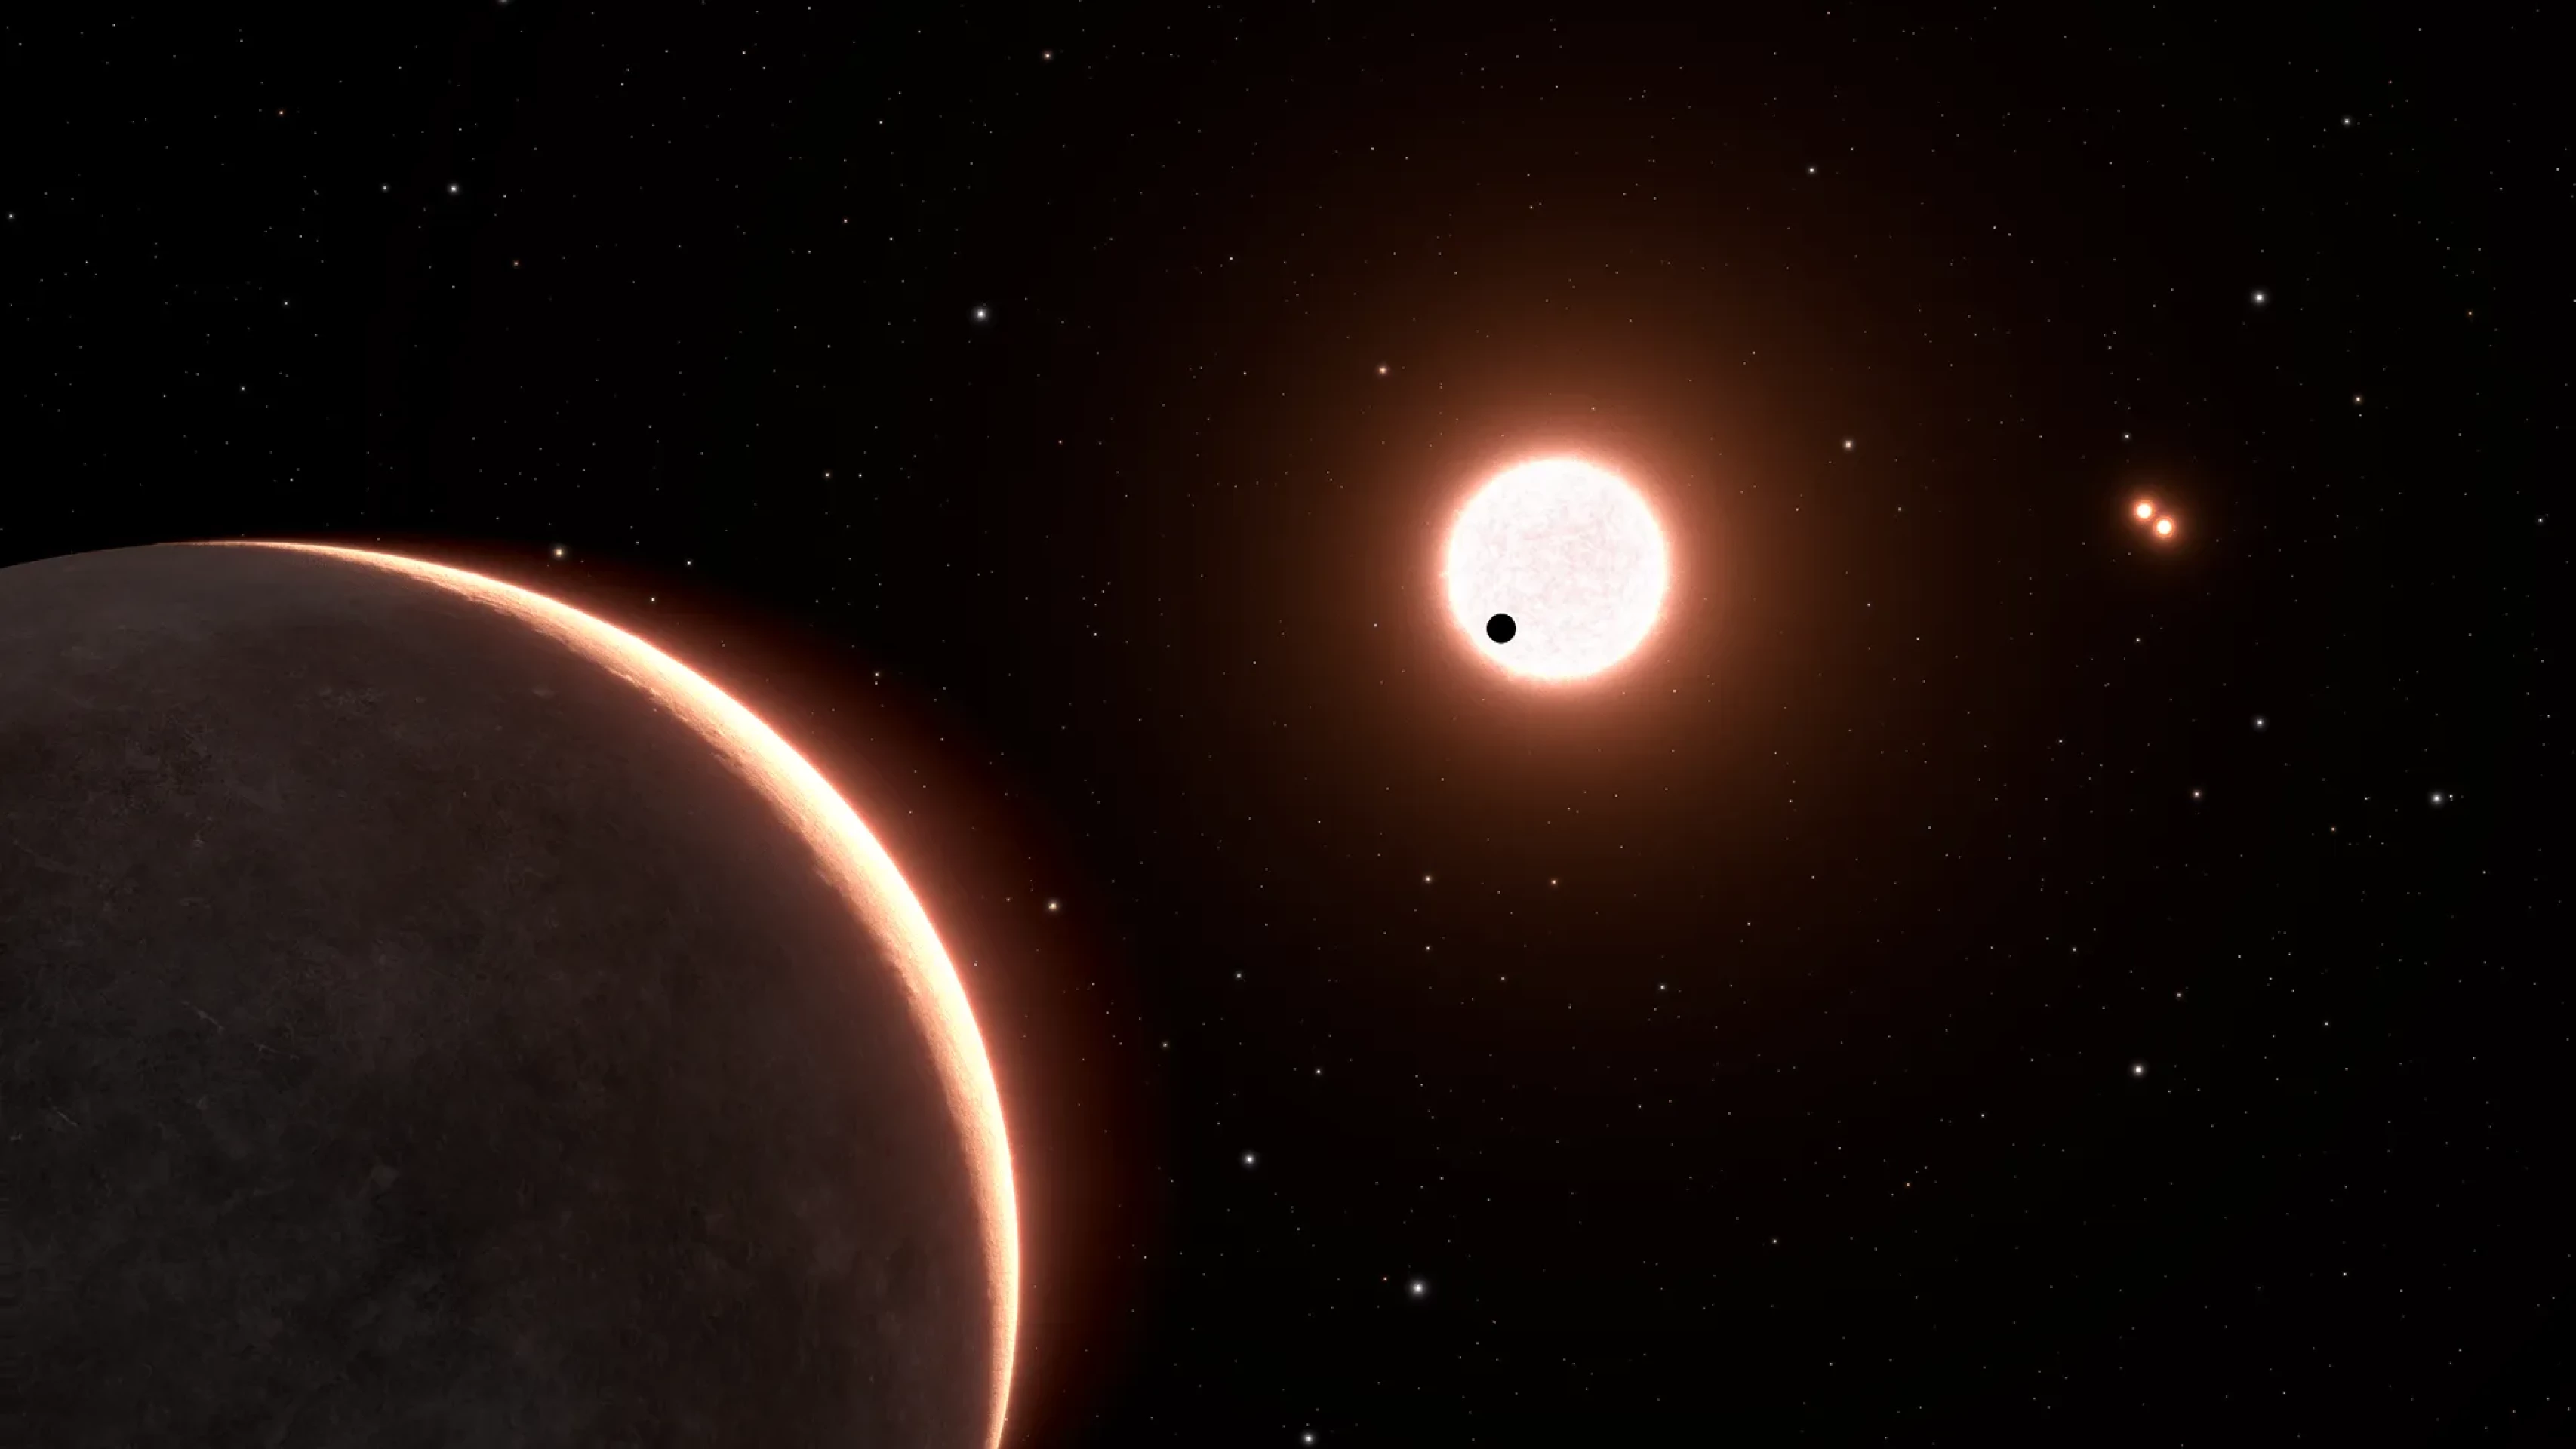 photo: Closest Earth-sized exoplanet found only 22 light-years away